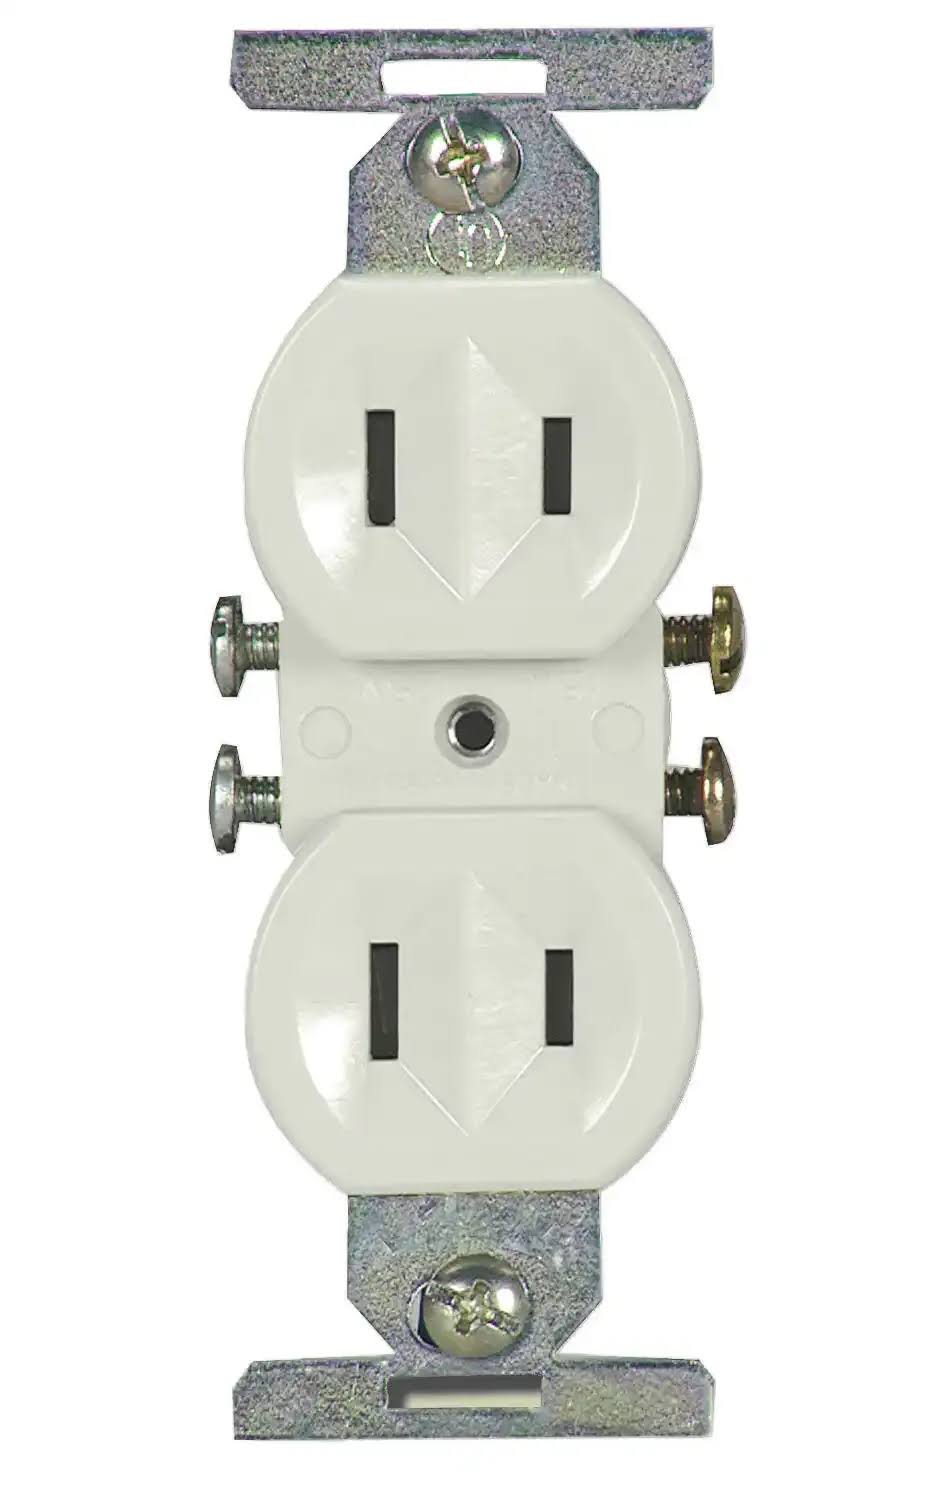 Cooper Wiring 736w-box Duplex Receptacle Outlet - 15amp